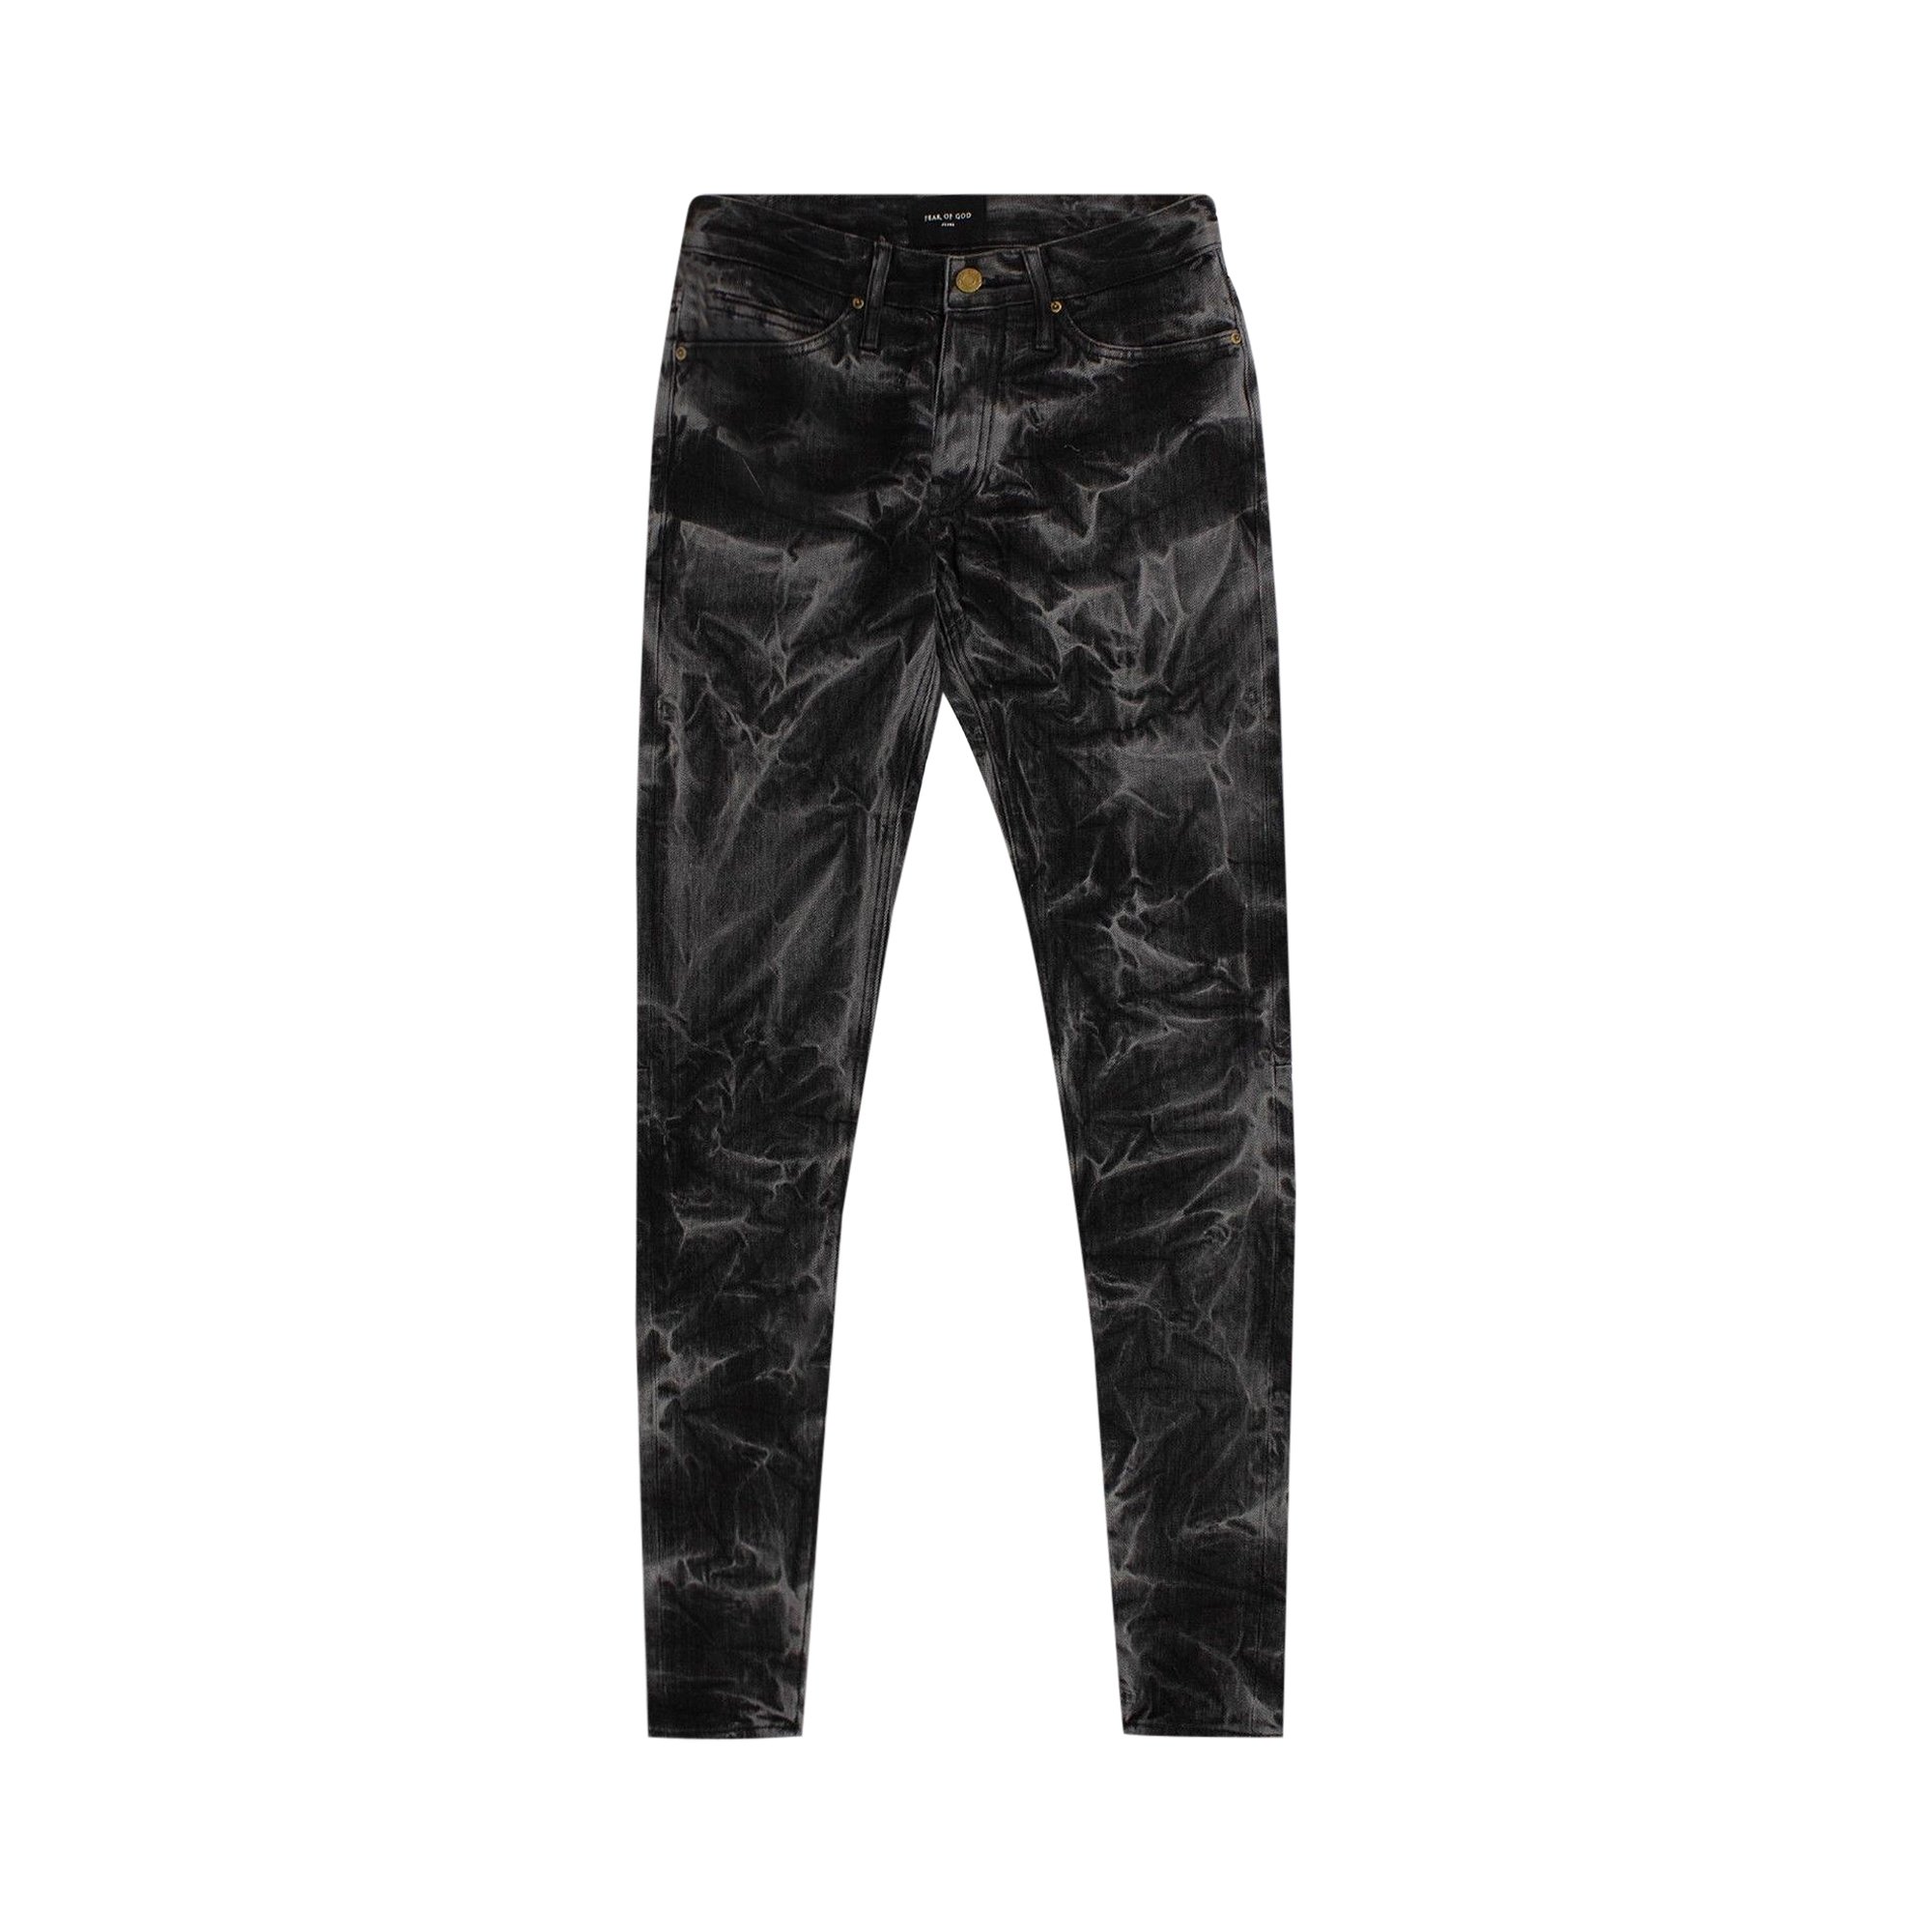 Fear of God Selvedge Holy Water Jeans 'Black' | GOAT